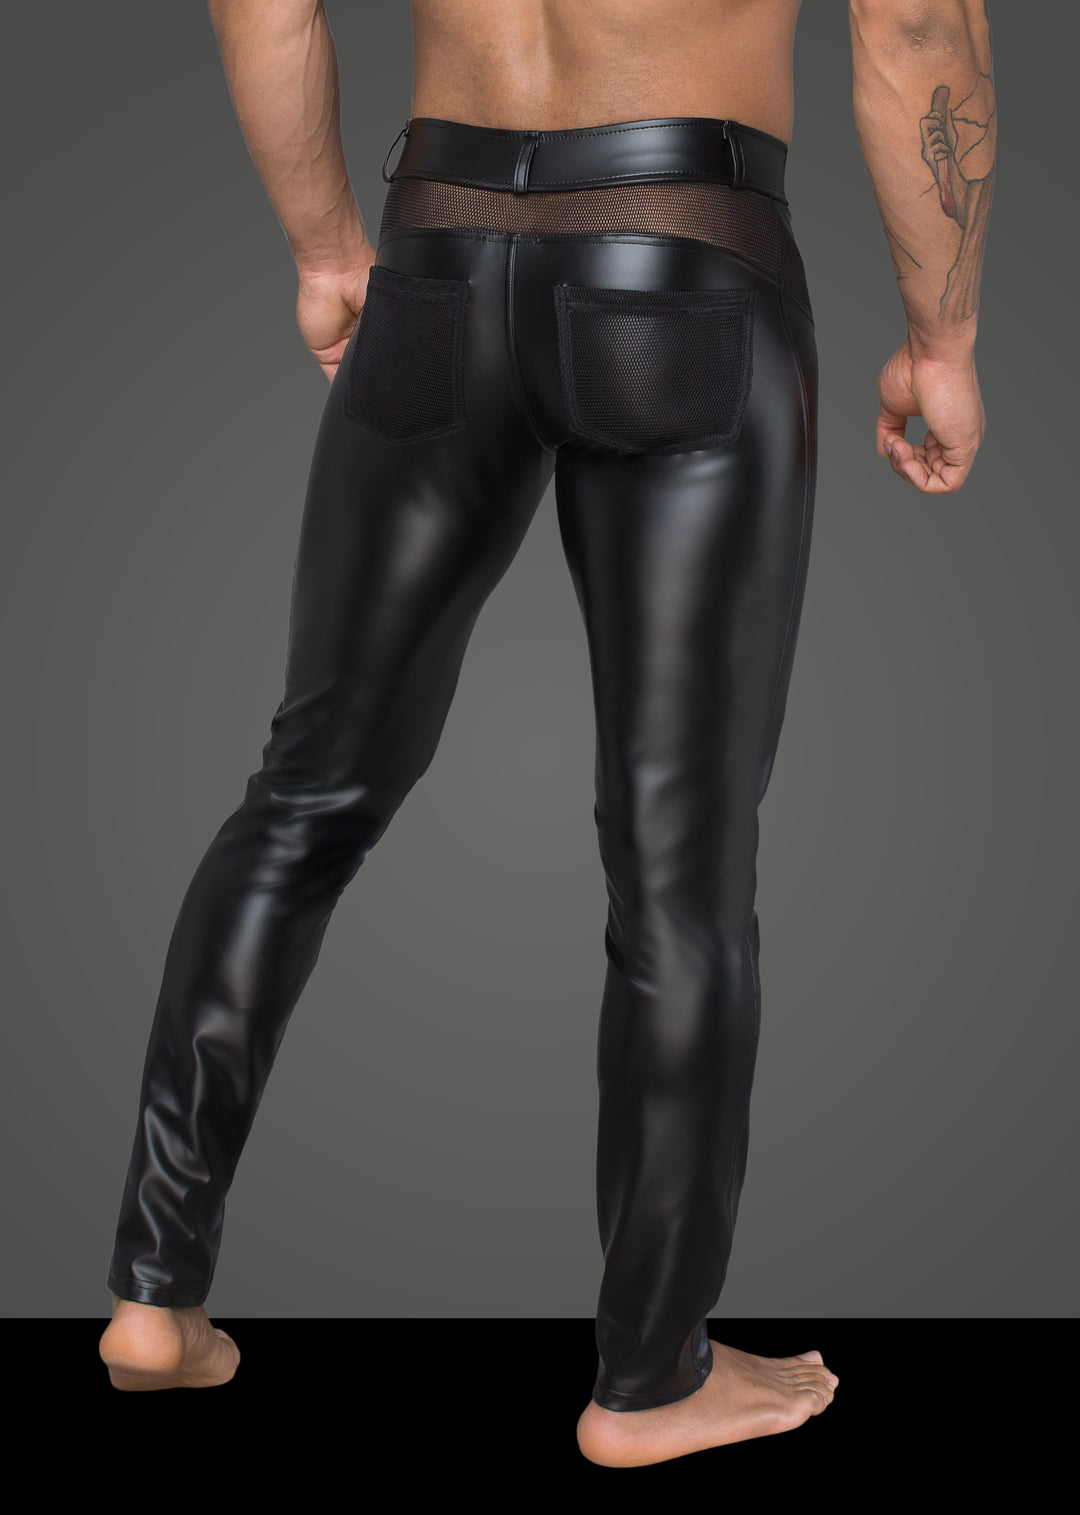 Man wearing Powerwetlook Long pants with inserts and pockets made of 3D net back view